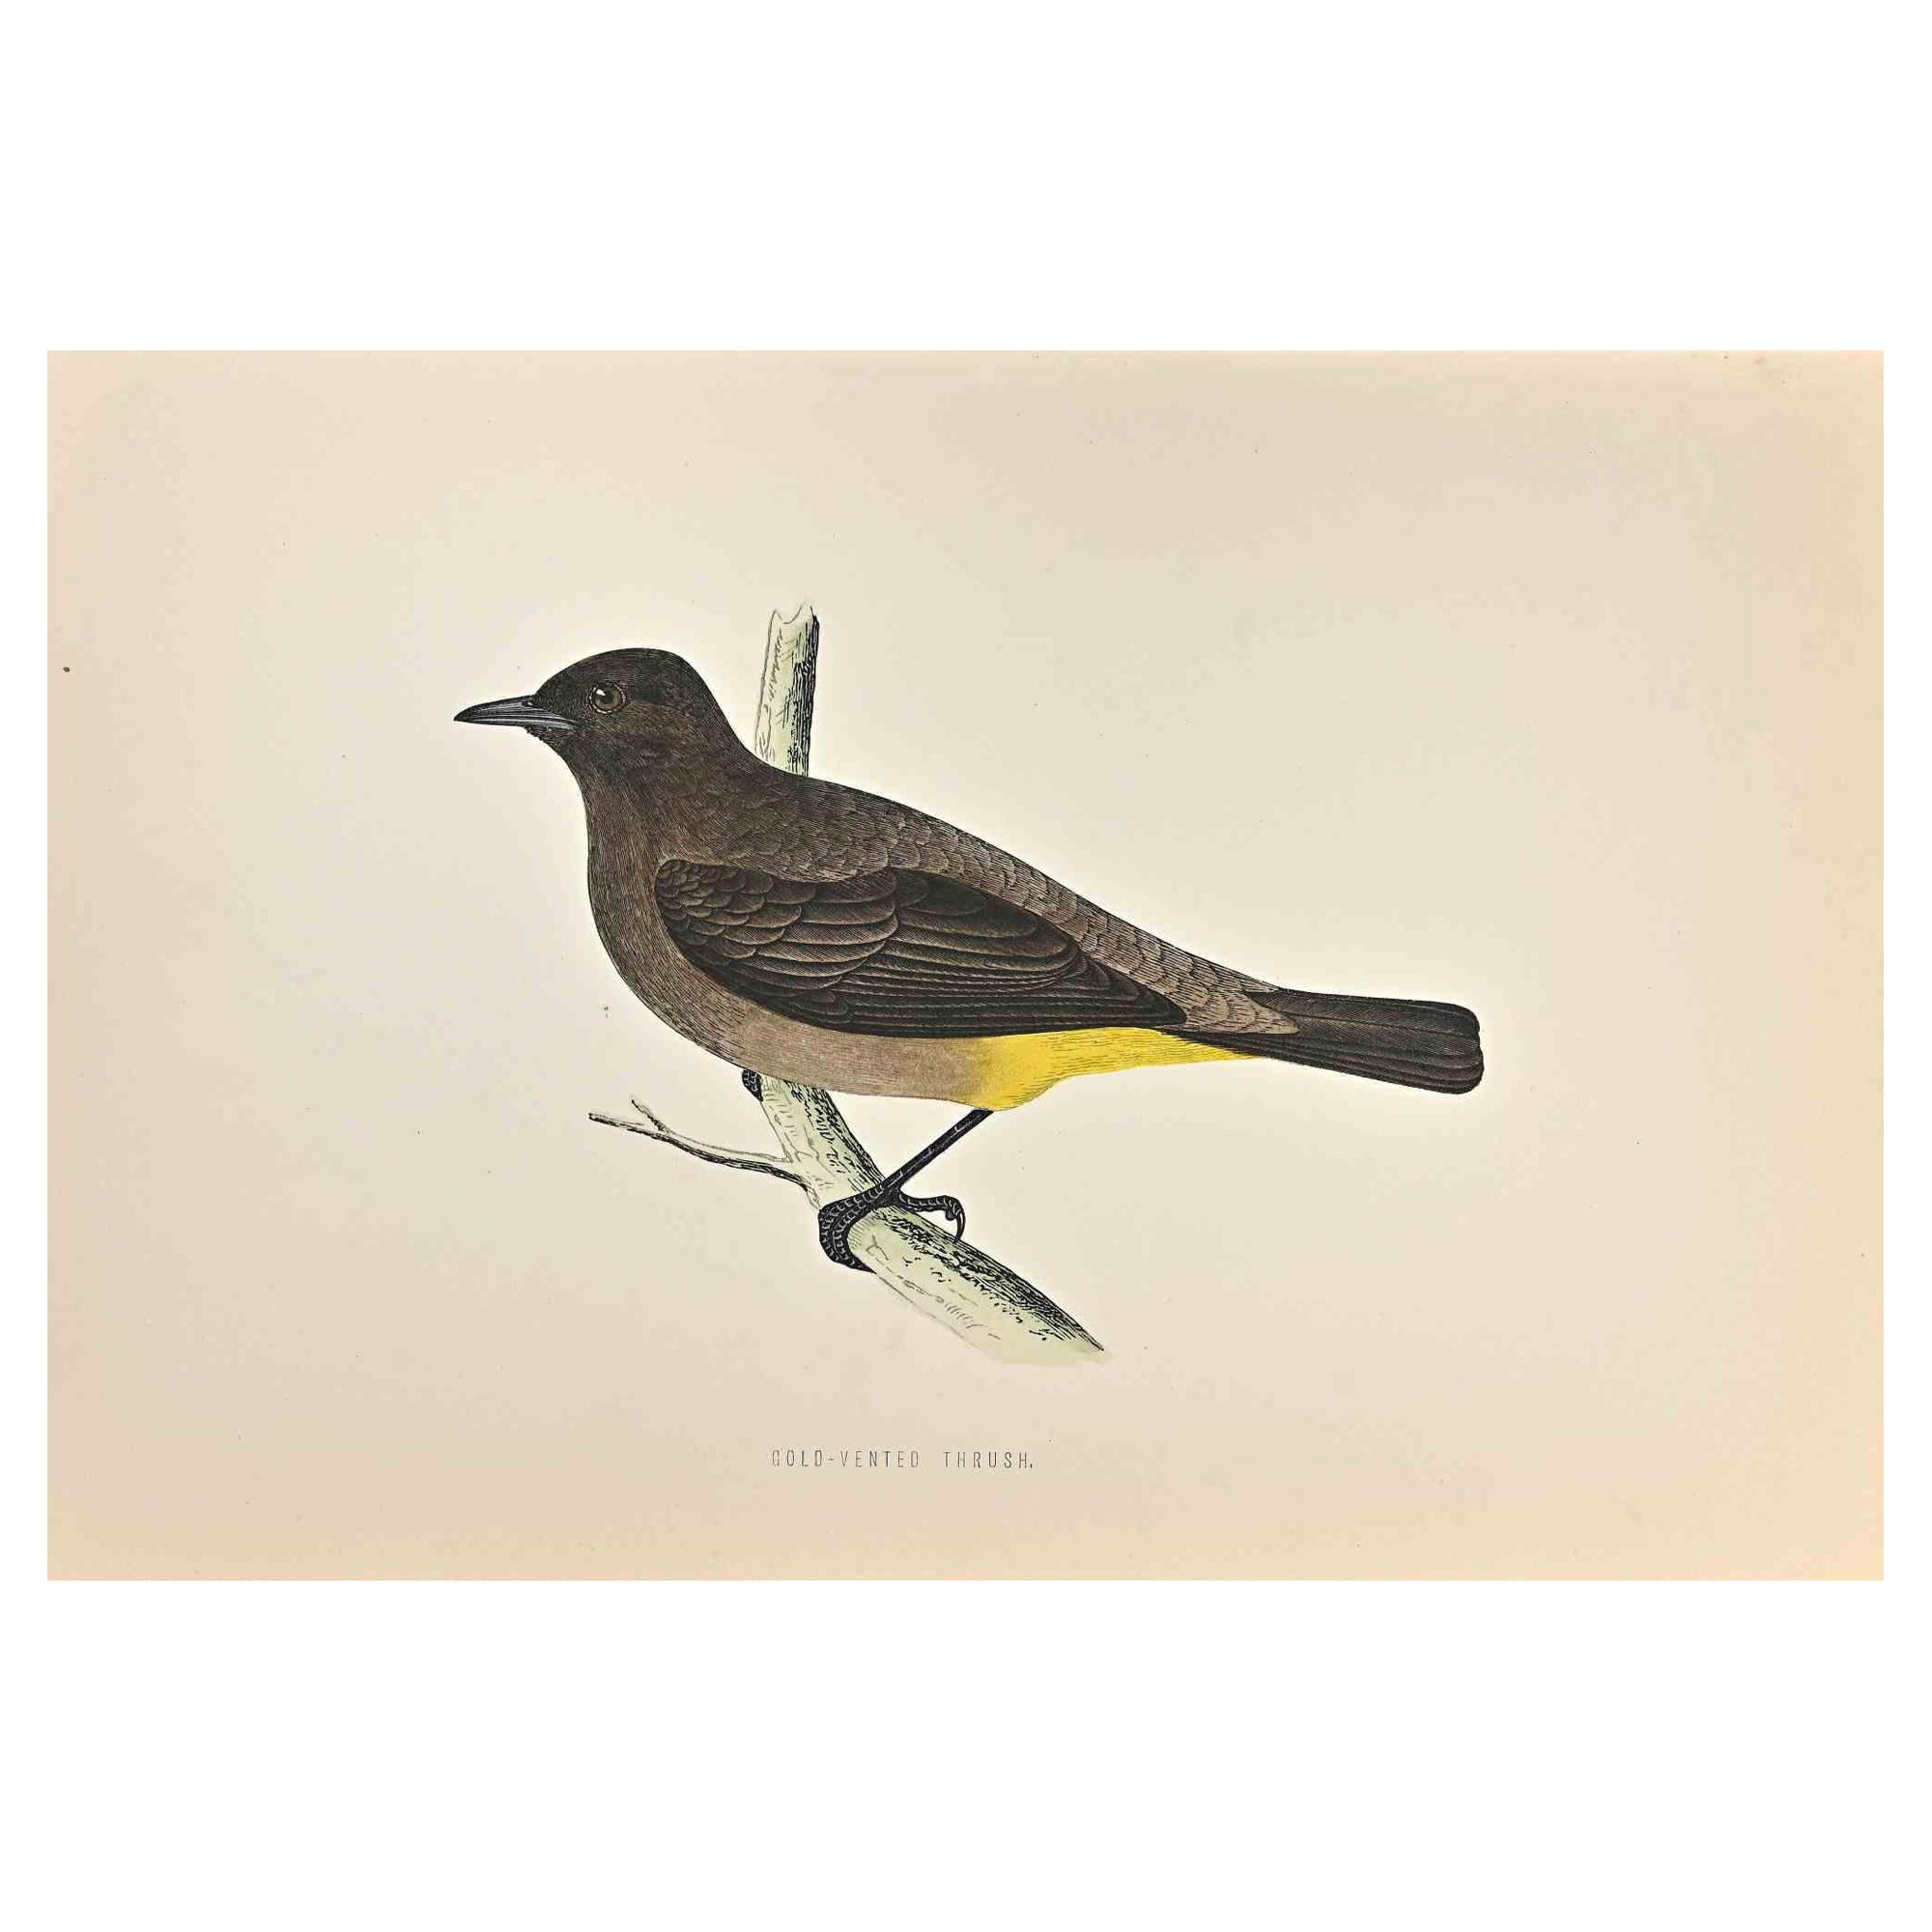 Gold-Vented Thrush is a modern artwork realized in 1870 by the British artist Alexander Francis Lydon (1836-1917) . 

Woodcut print, hand colored, published by London, Bell & Sons, 1870.  Name of the bird printed in plate. This work is part of a